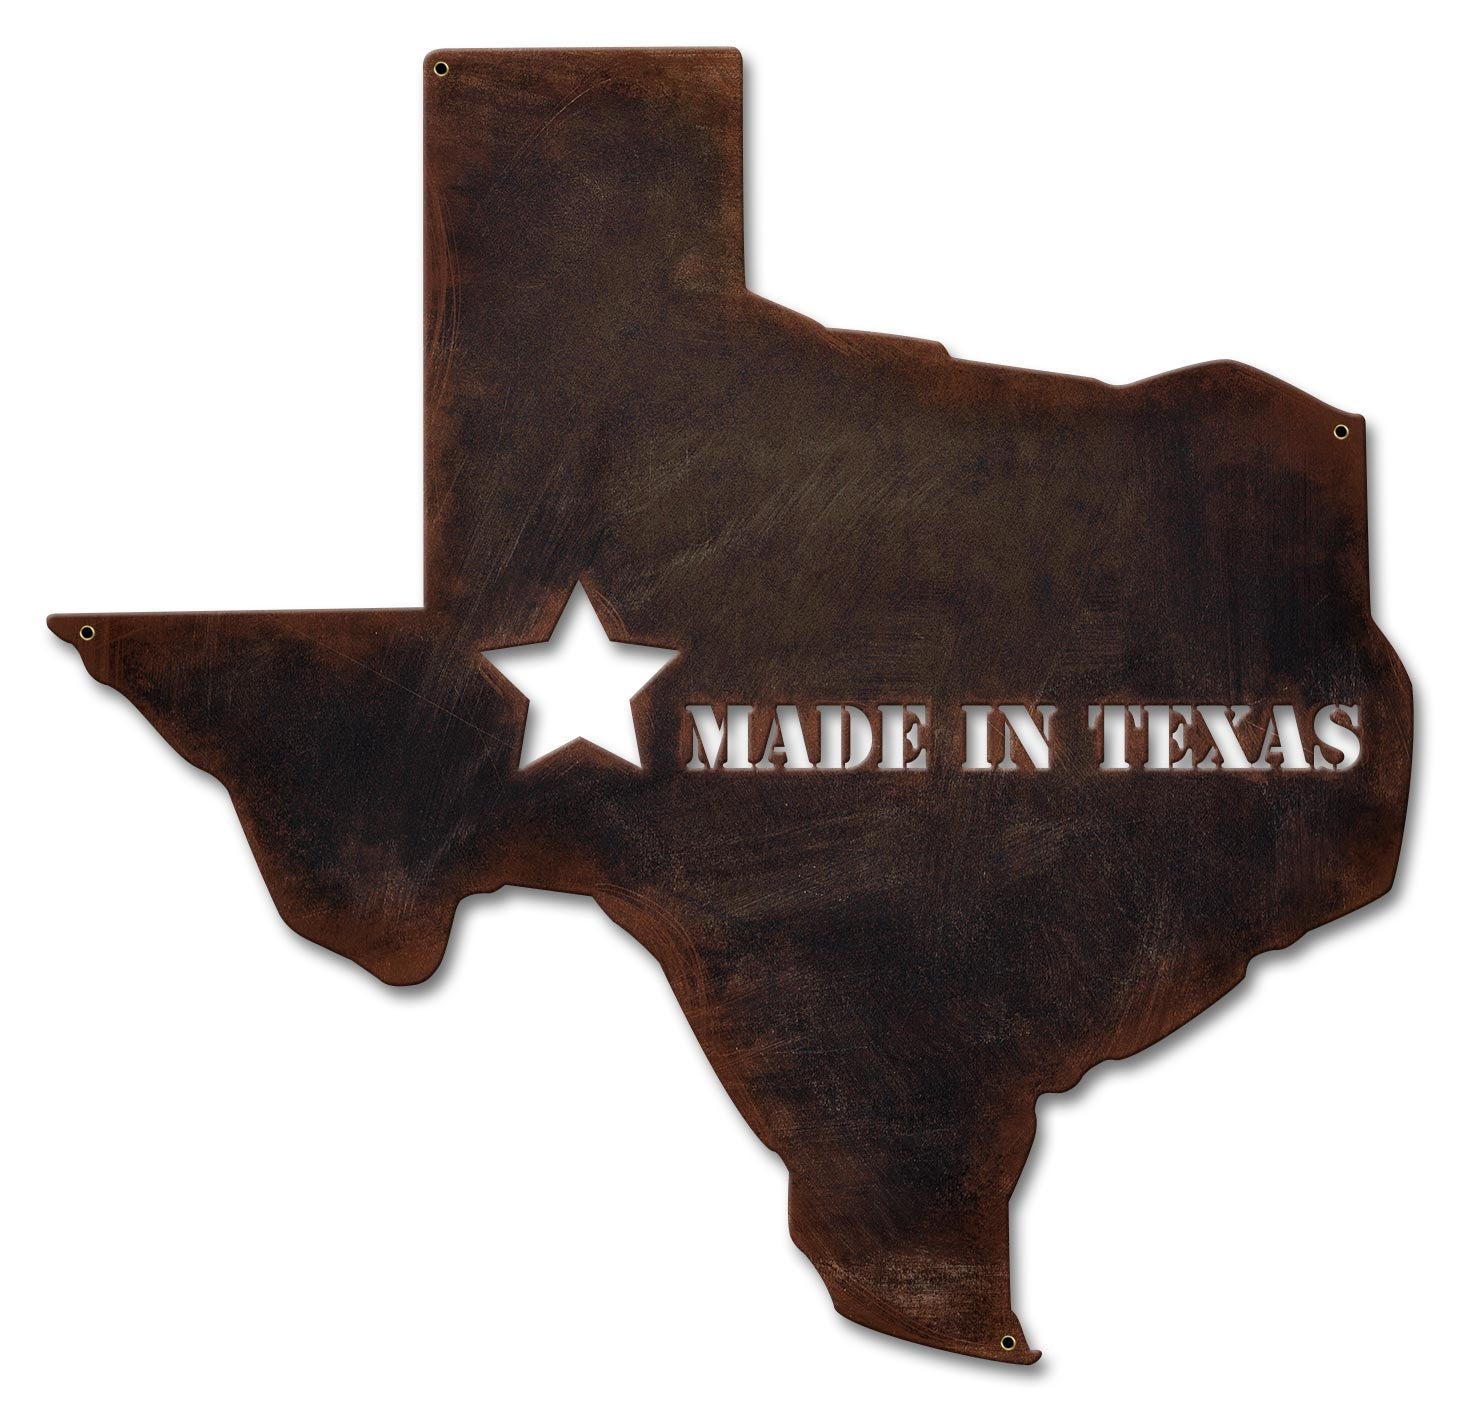 Made In Texas Vintage Sign